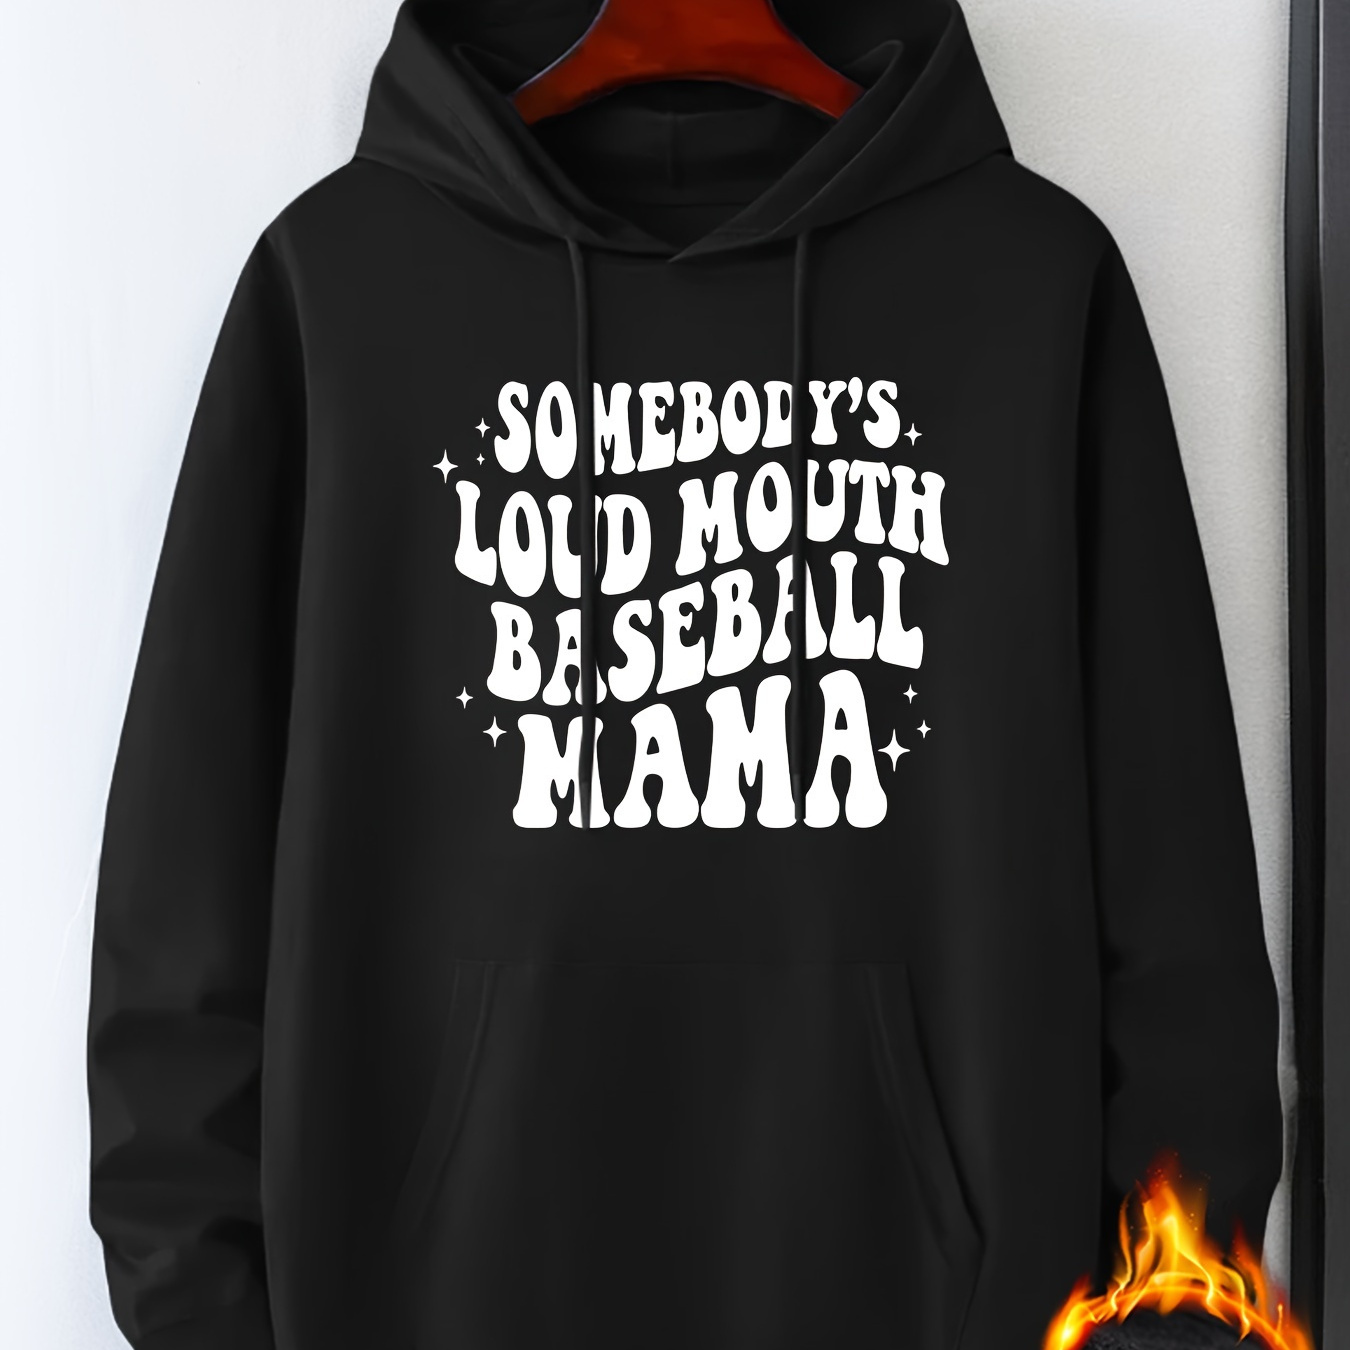 

Somebody's Loud Mouth Baseball Mama Print Sweatshirt, Men's Fleece Long Sleeve Hoodies Street Casual Sports And Fashionable With Kangaroo Pocket, For Outdoor Sports, For Autumn Winter, Warm And Cozy